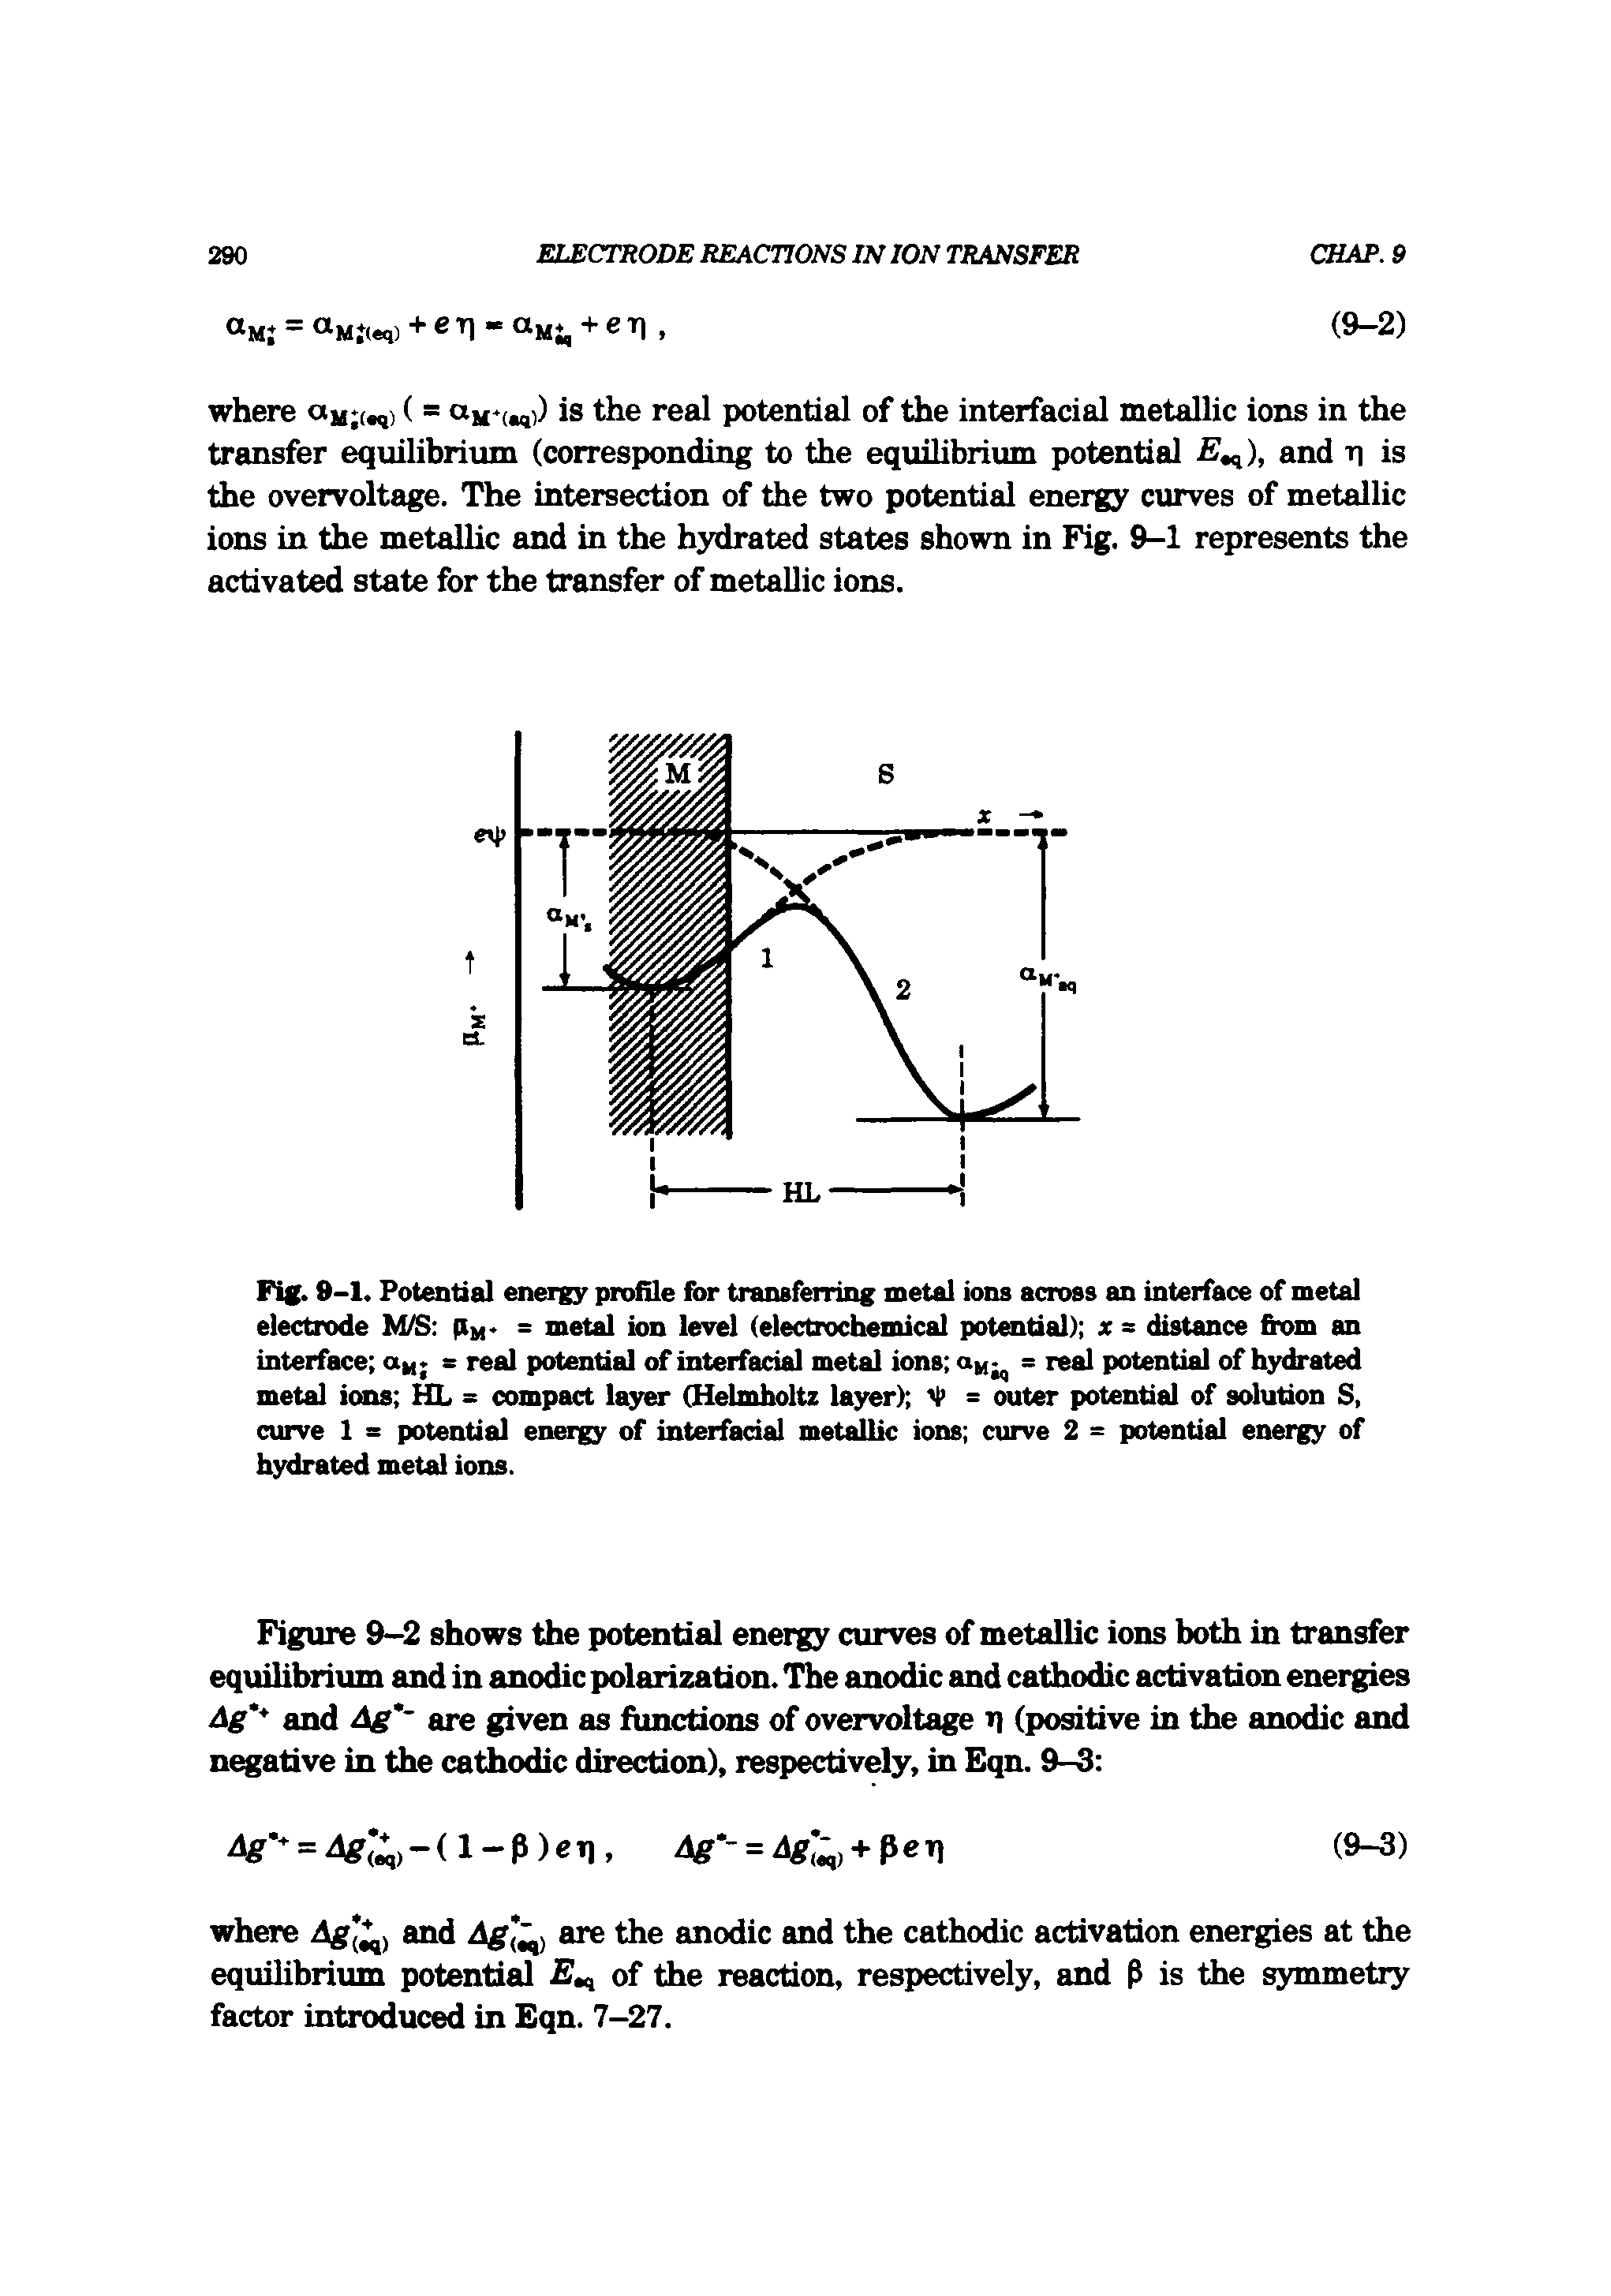 Fig. 9-1. Potential energy profile for transferring metal ions across an interface of metal electrode M/S py. = metal ion level (electrochemical potential) x = distance fiom an interface au. = real potential of interfacial metal ions = real potential of hydrated metal ions - compact layer (Helmholtz layer) V = outer potential of solution S, curve 1 = potential energy of interfadal metallic ions curve 2 = potential energy of hydrated metal ions.